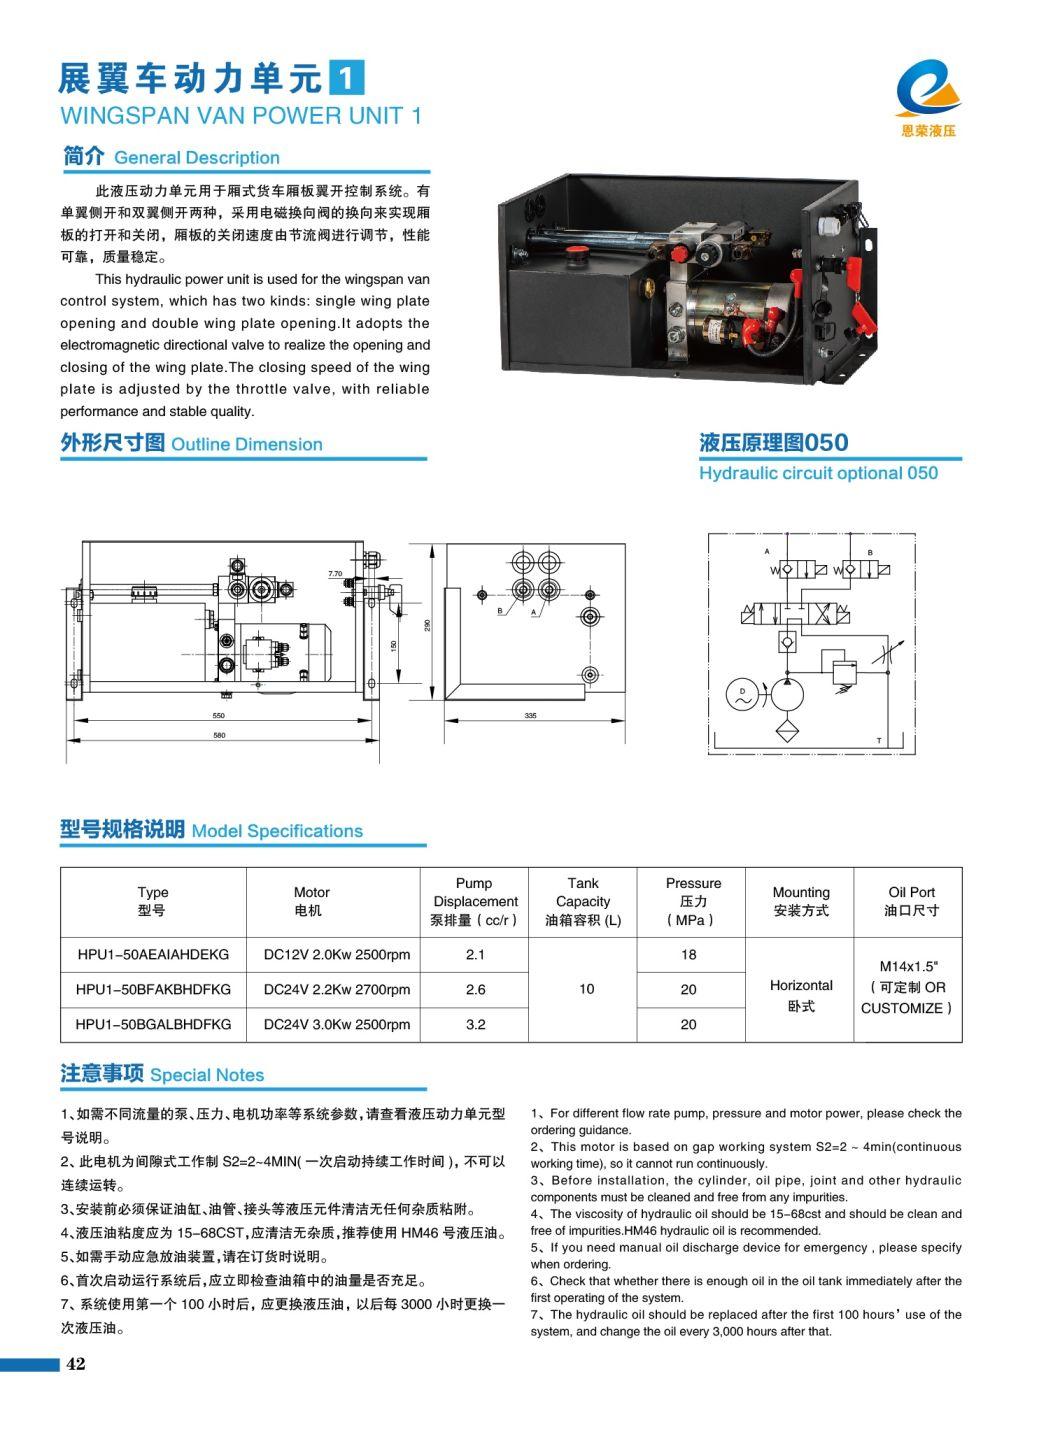 Hydraulic Power System for Opening and Closing Wing of Van